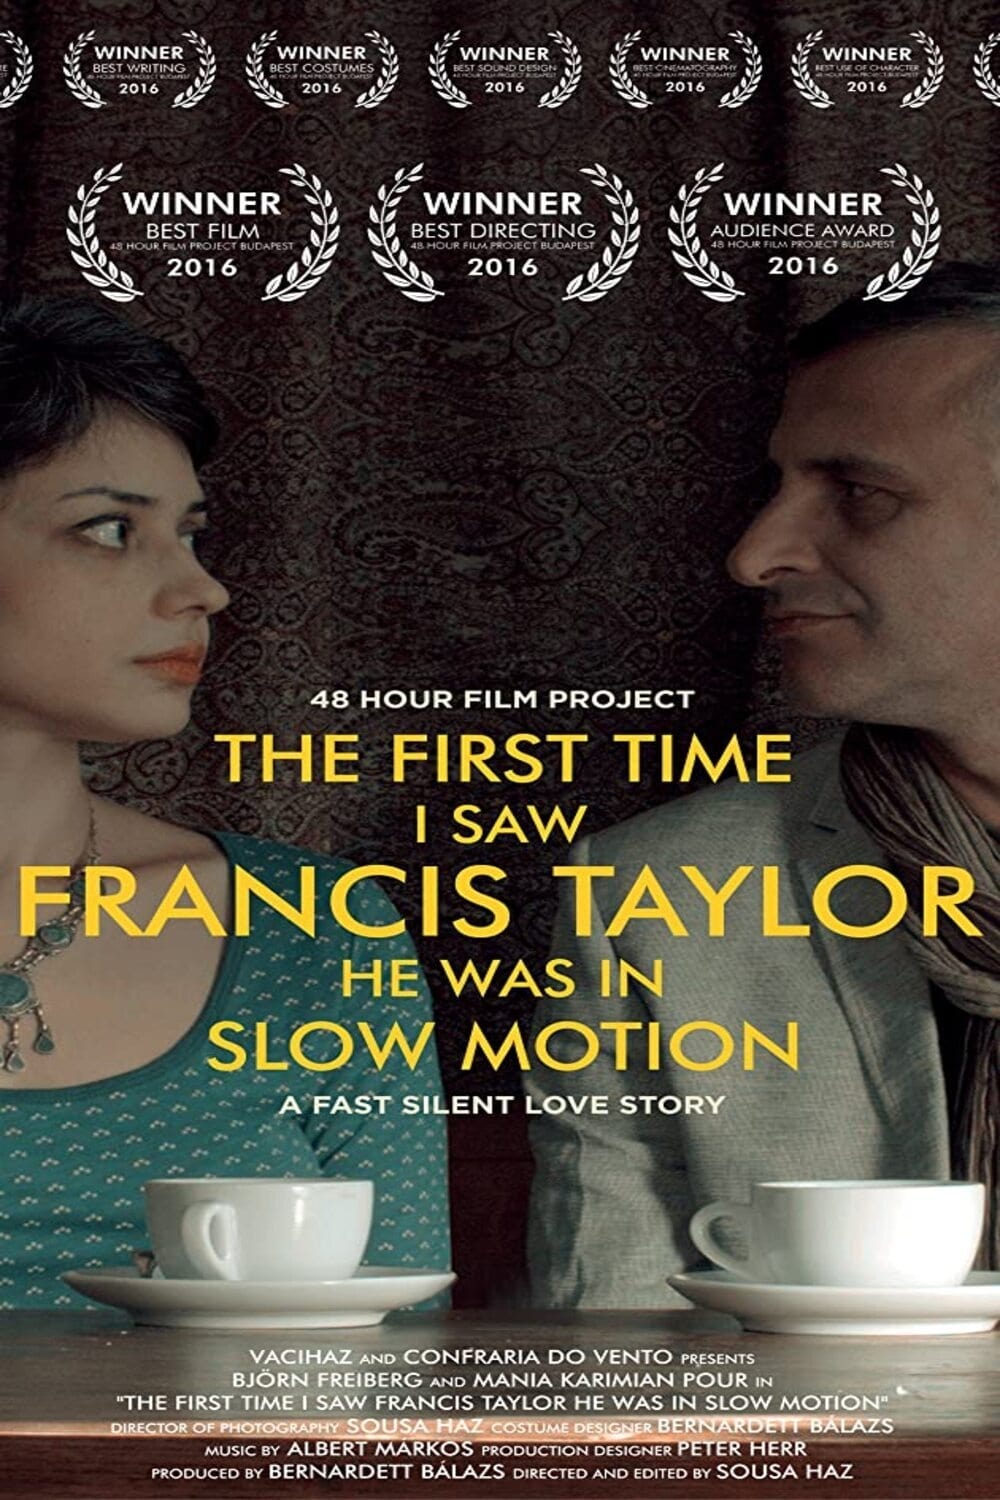 The First Time I Saw Francis Taylor He Was in Slow Motion